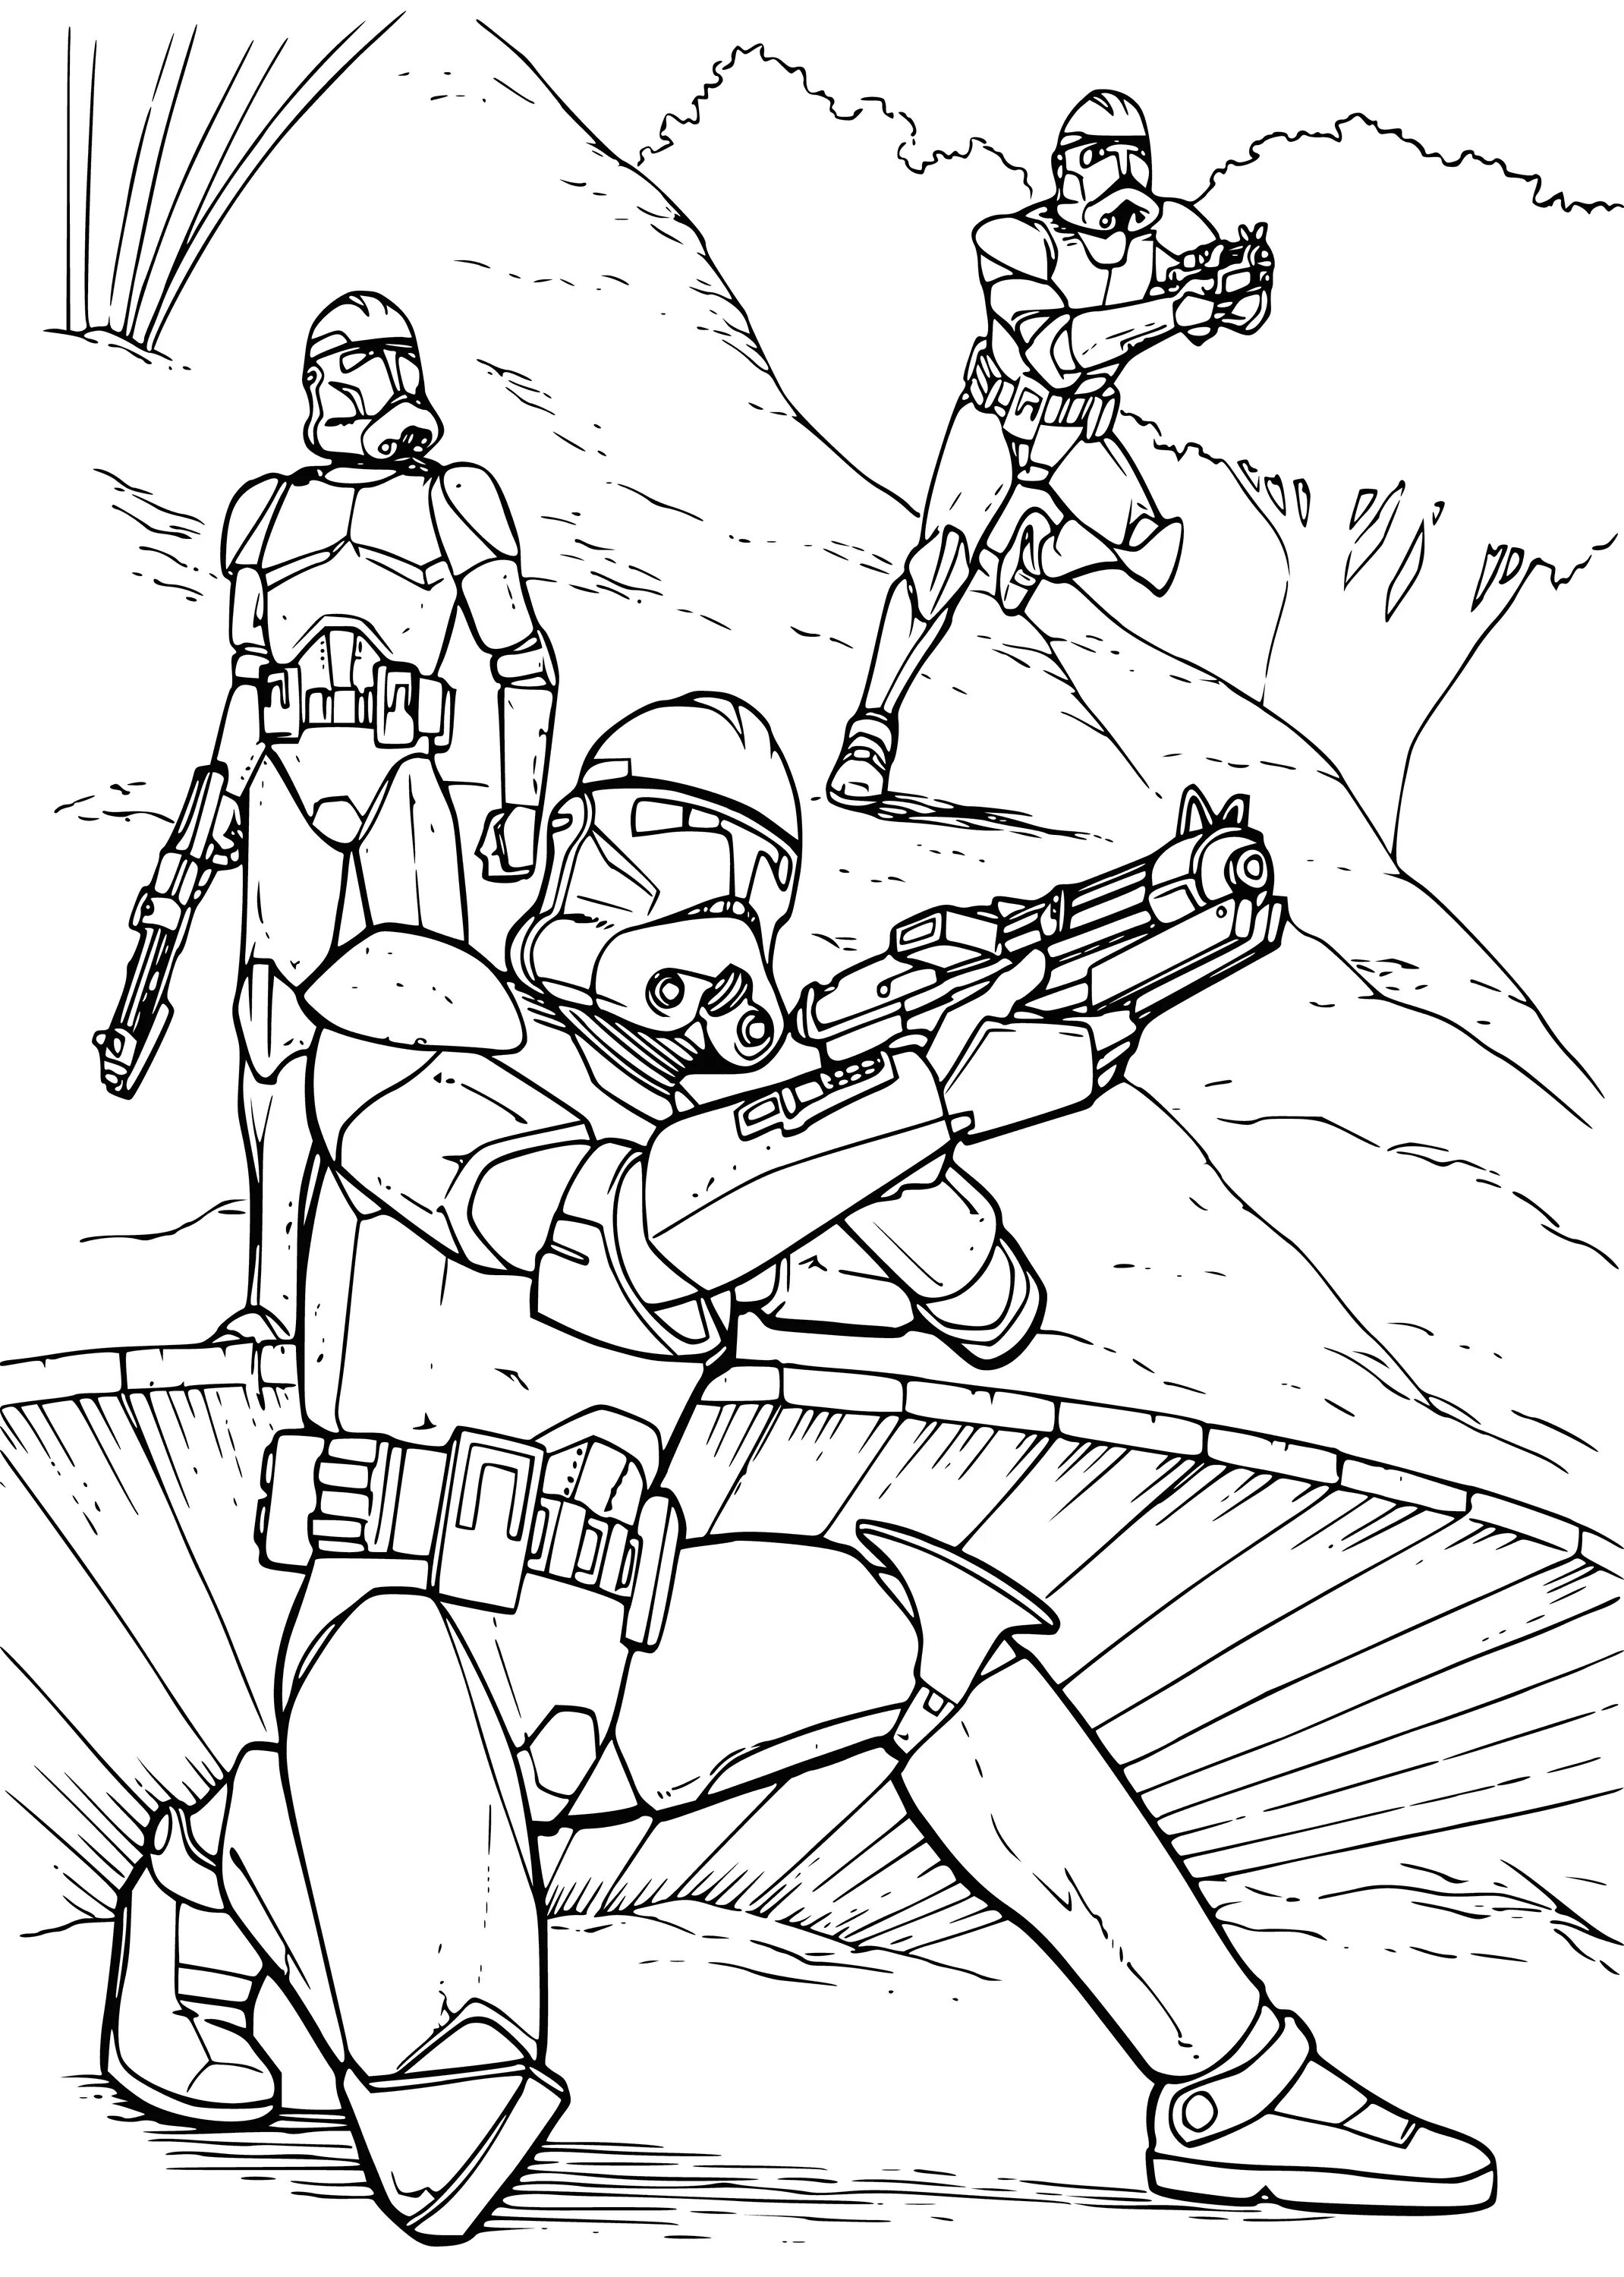 Animated star wars coloring book for kids